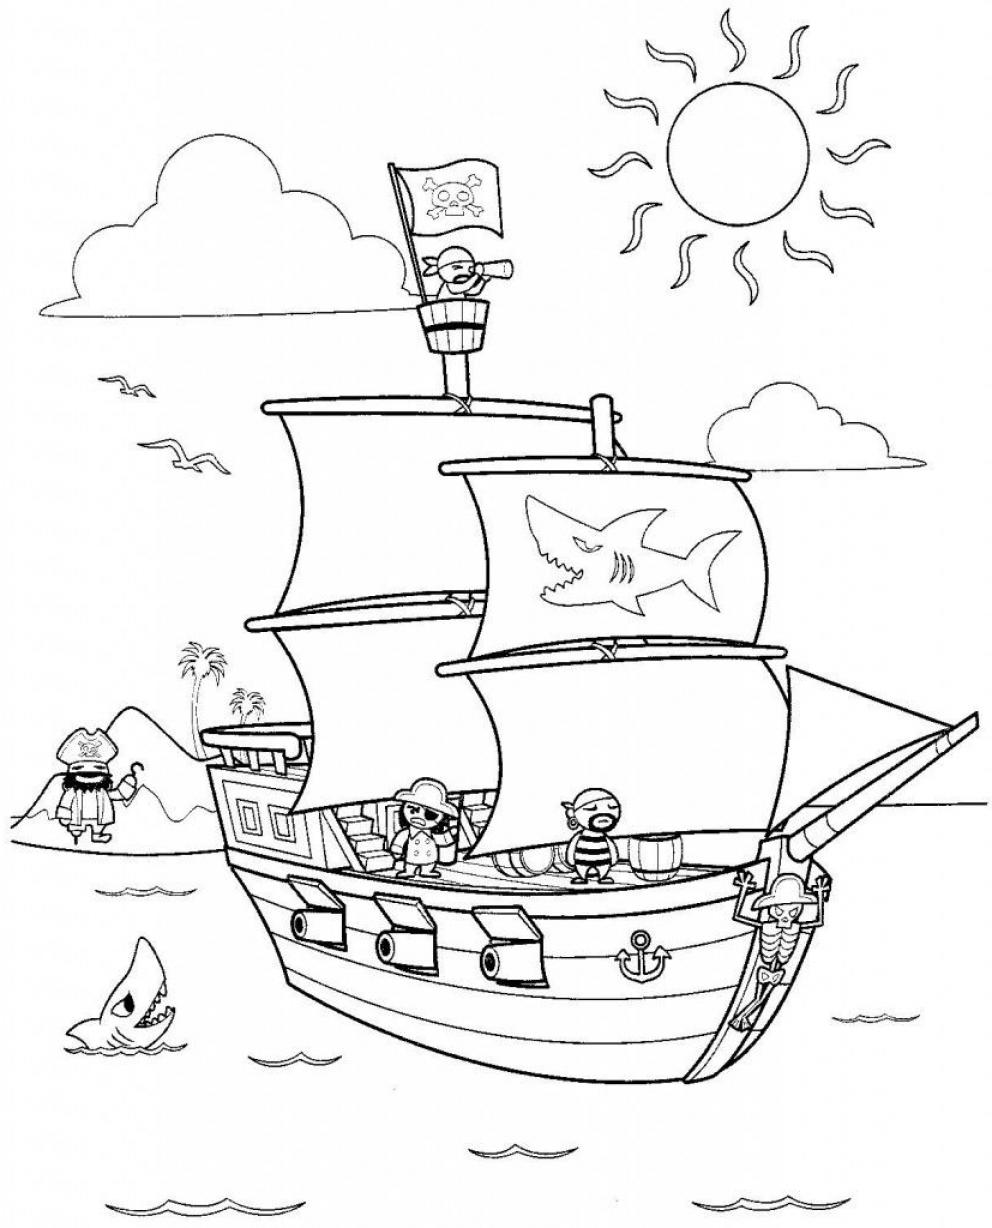 Pirate boat coloring pages for kids - SheetalColor.com